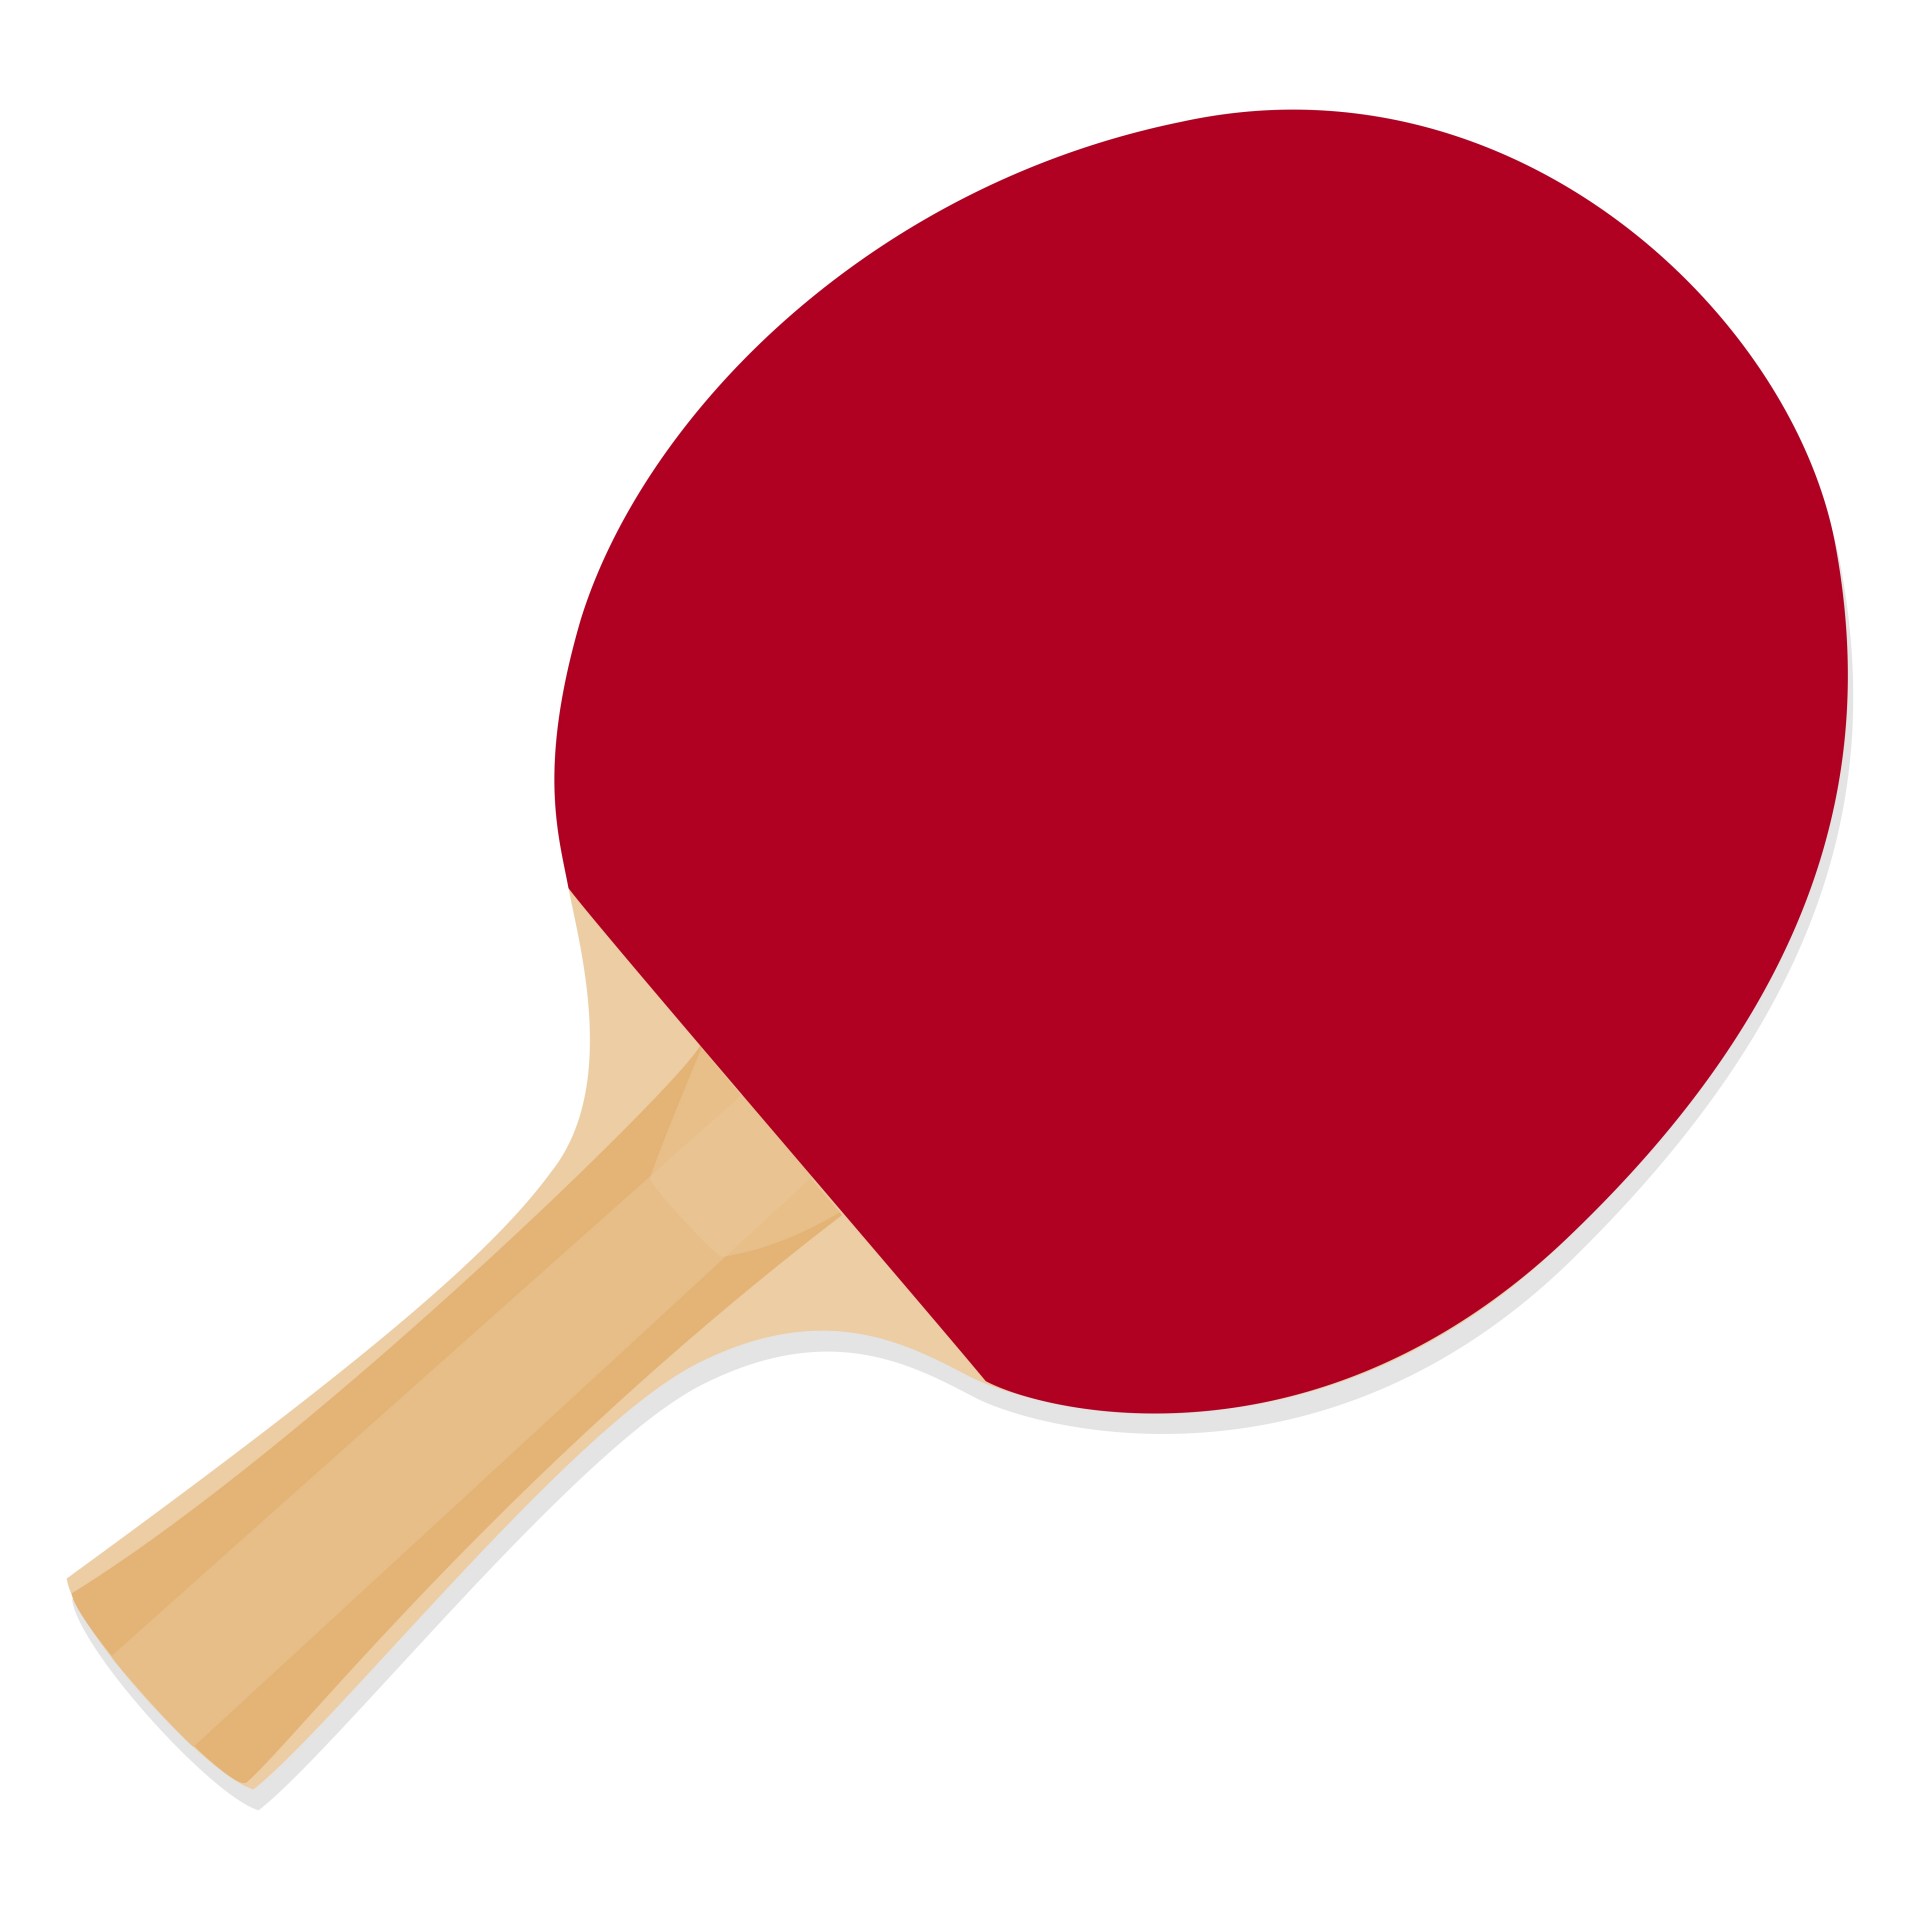 Racket For Playing Table Tennis